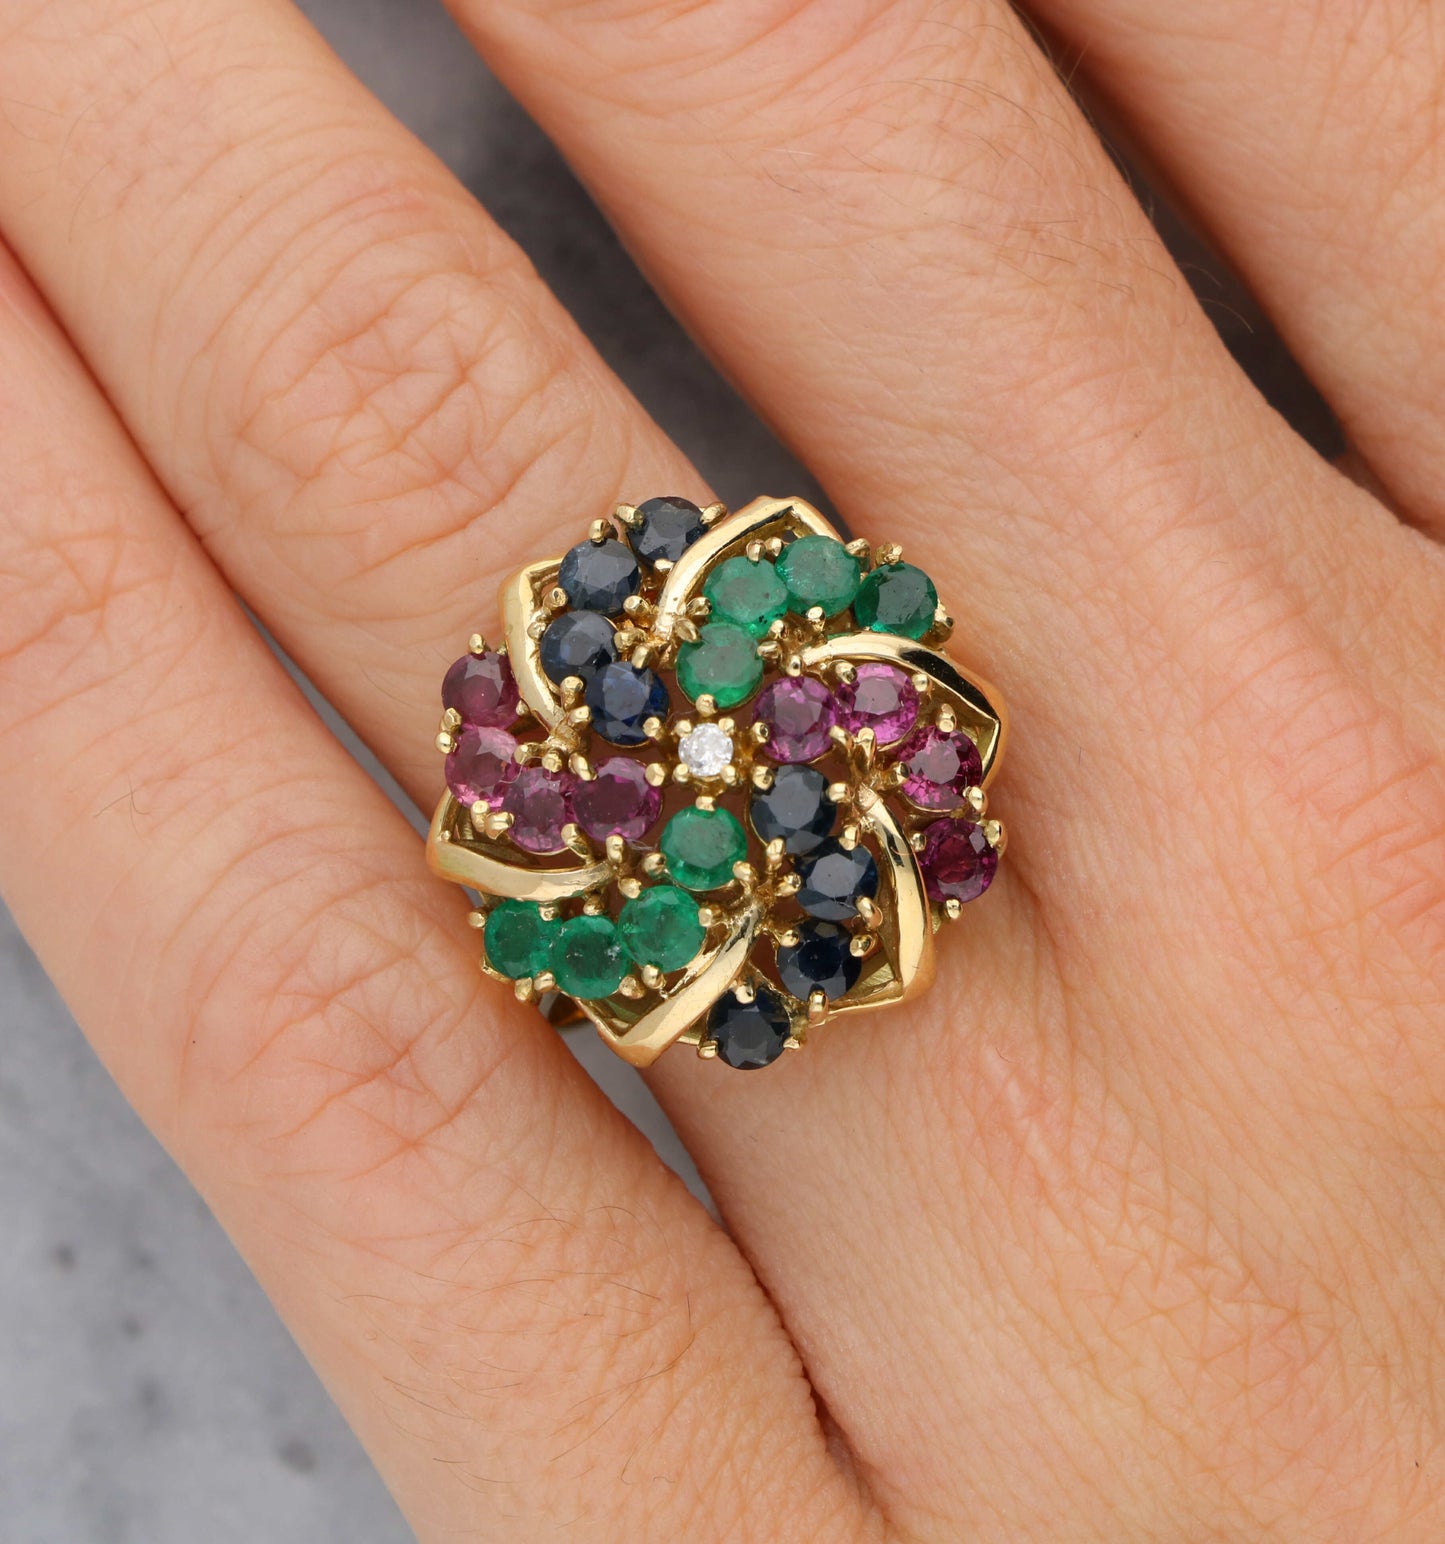 Diamond, emerald, ruby and sapphire cocktail ring